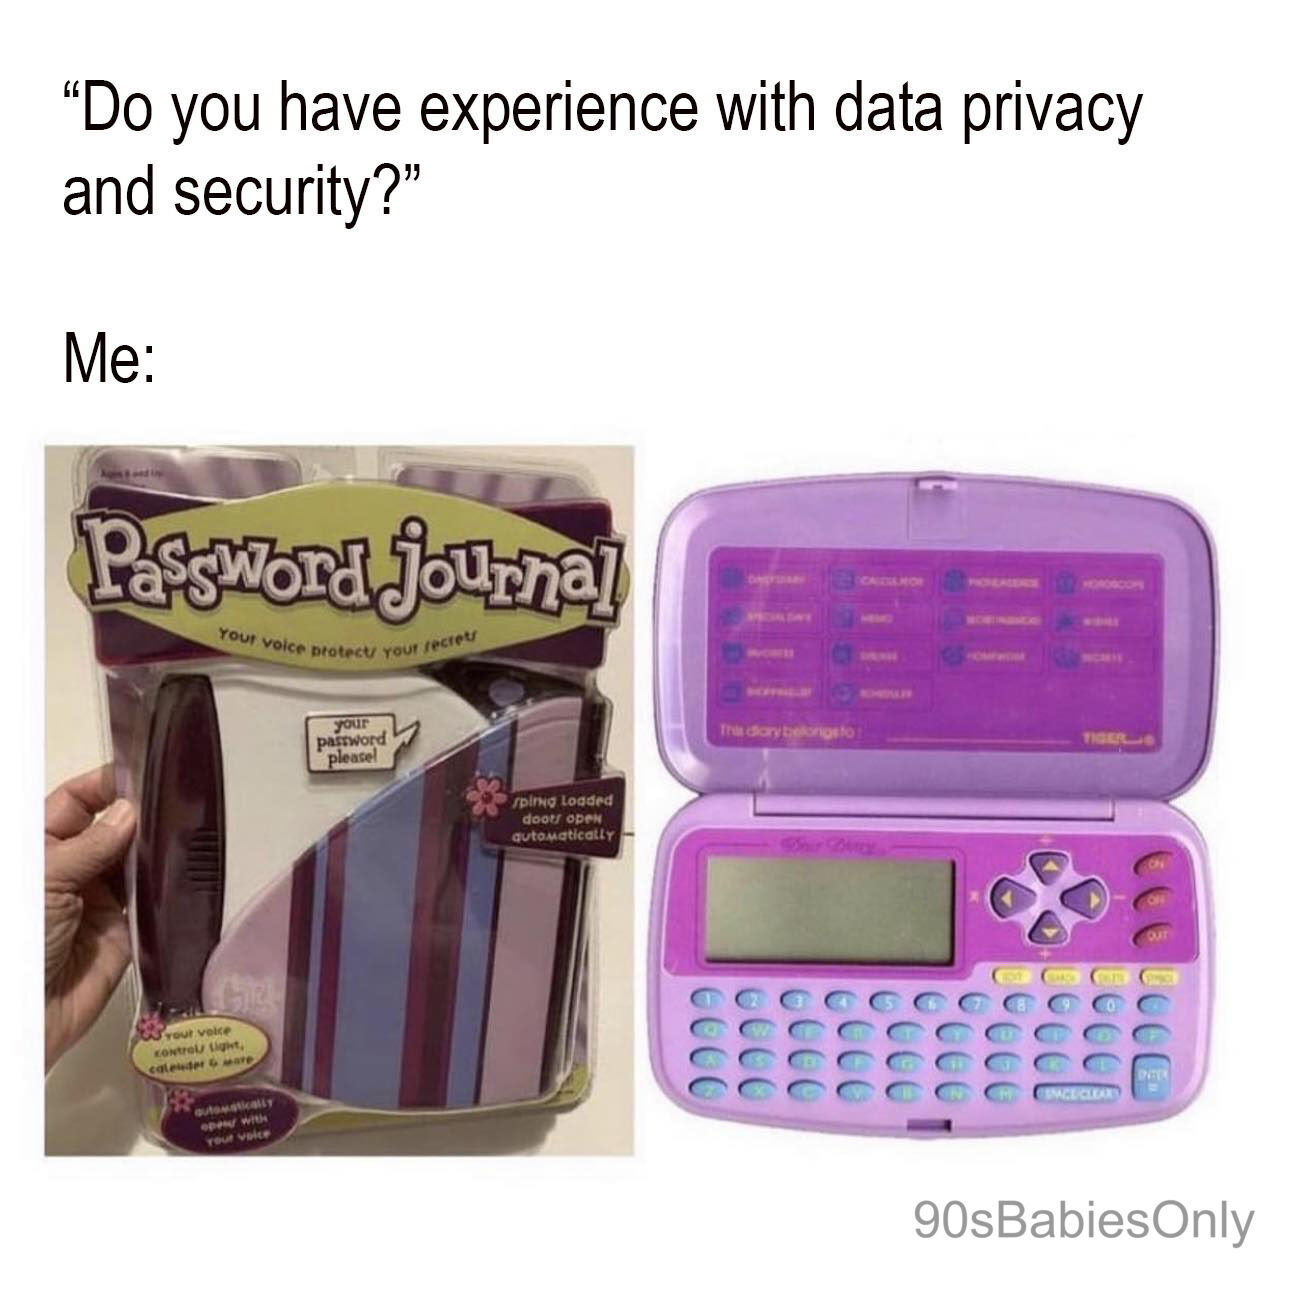 Text: "Do you have experience with data privacy and security?"

Me:
An image that shows a Password Journal and another similar device.